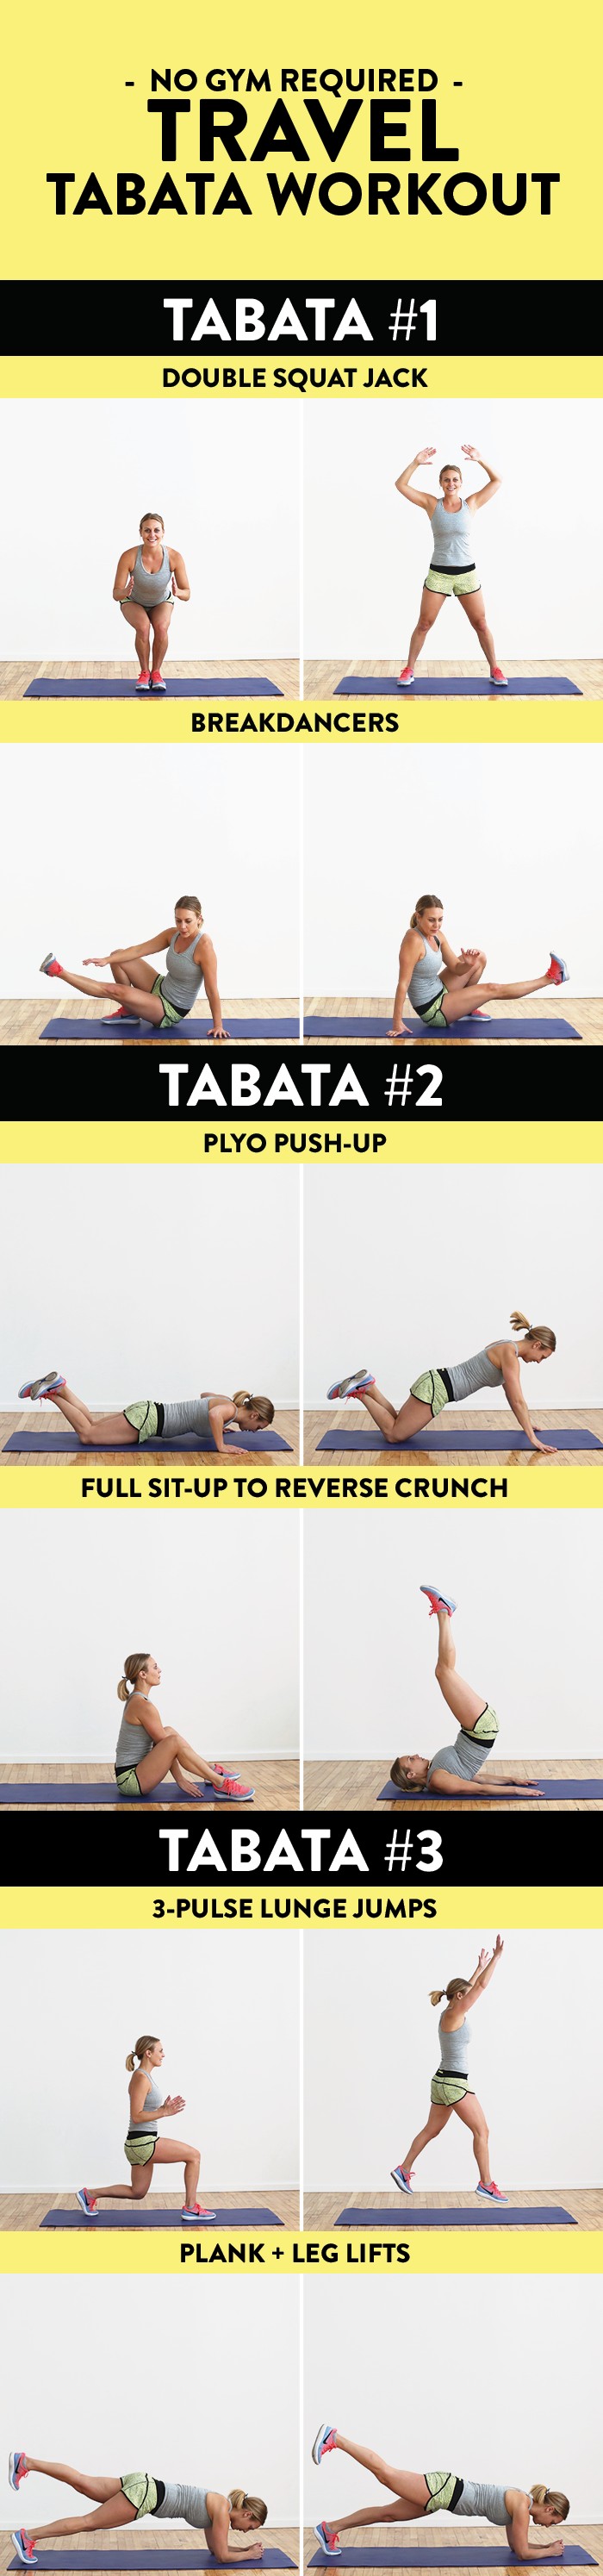 Got 24 minutes? All you need is your bodyweight to do this killer travel tabata workout! You can do this on the road, in your hotel room, or on the beach!